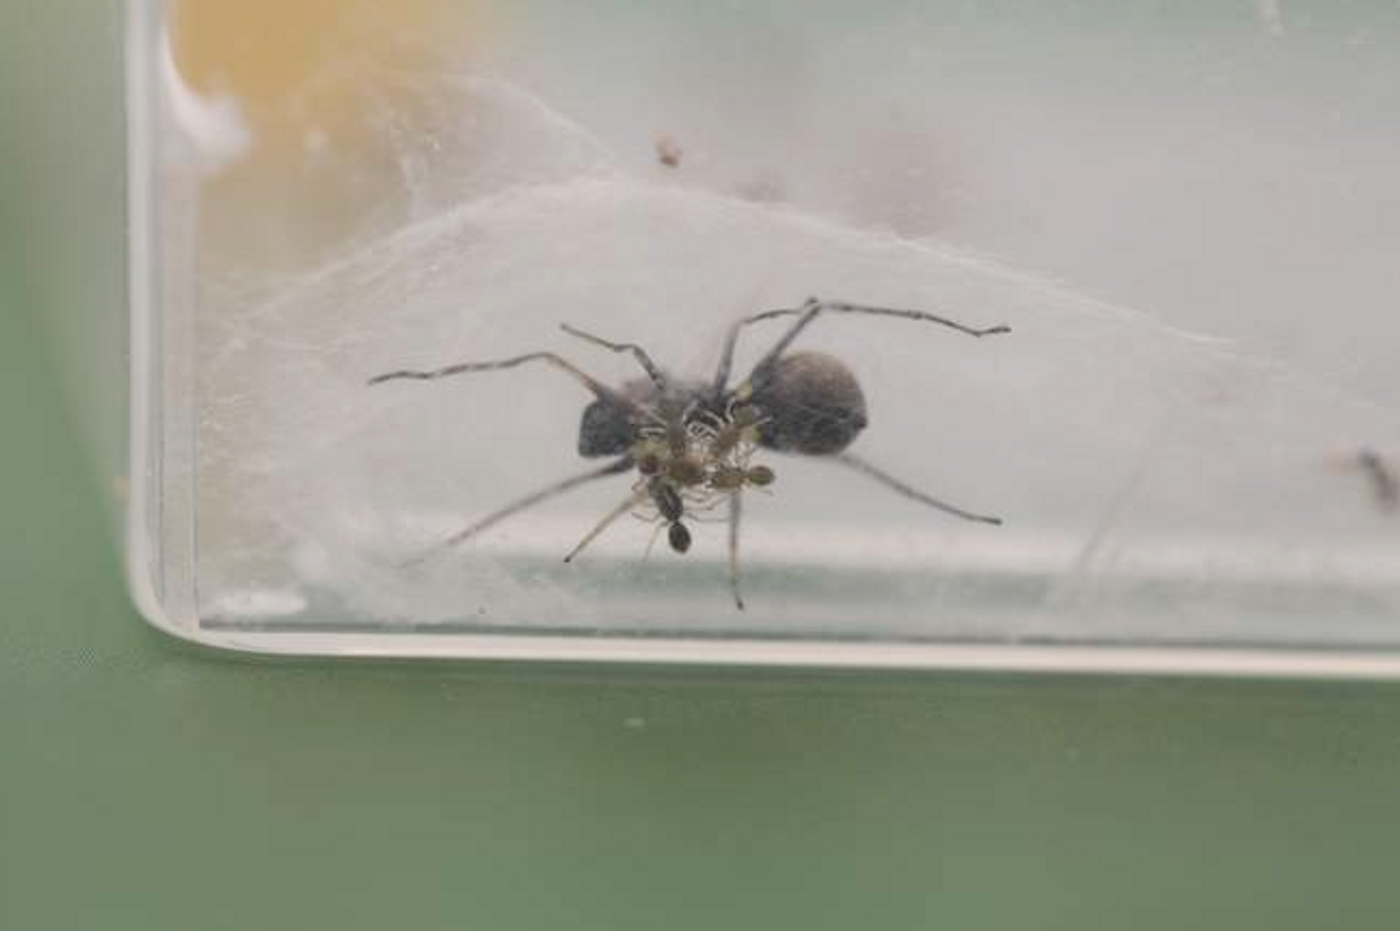 A mother spider is seen here nourishing her younglings with 'spider milk.'